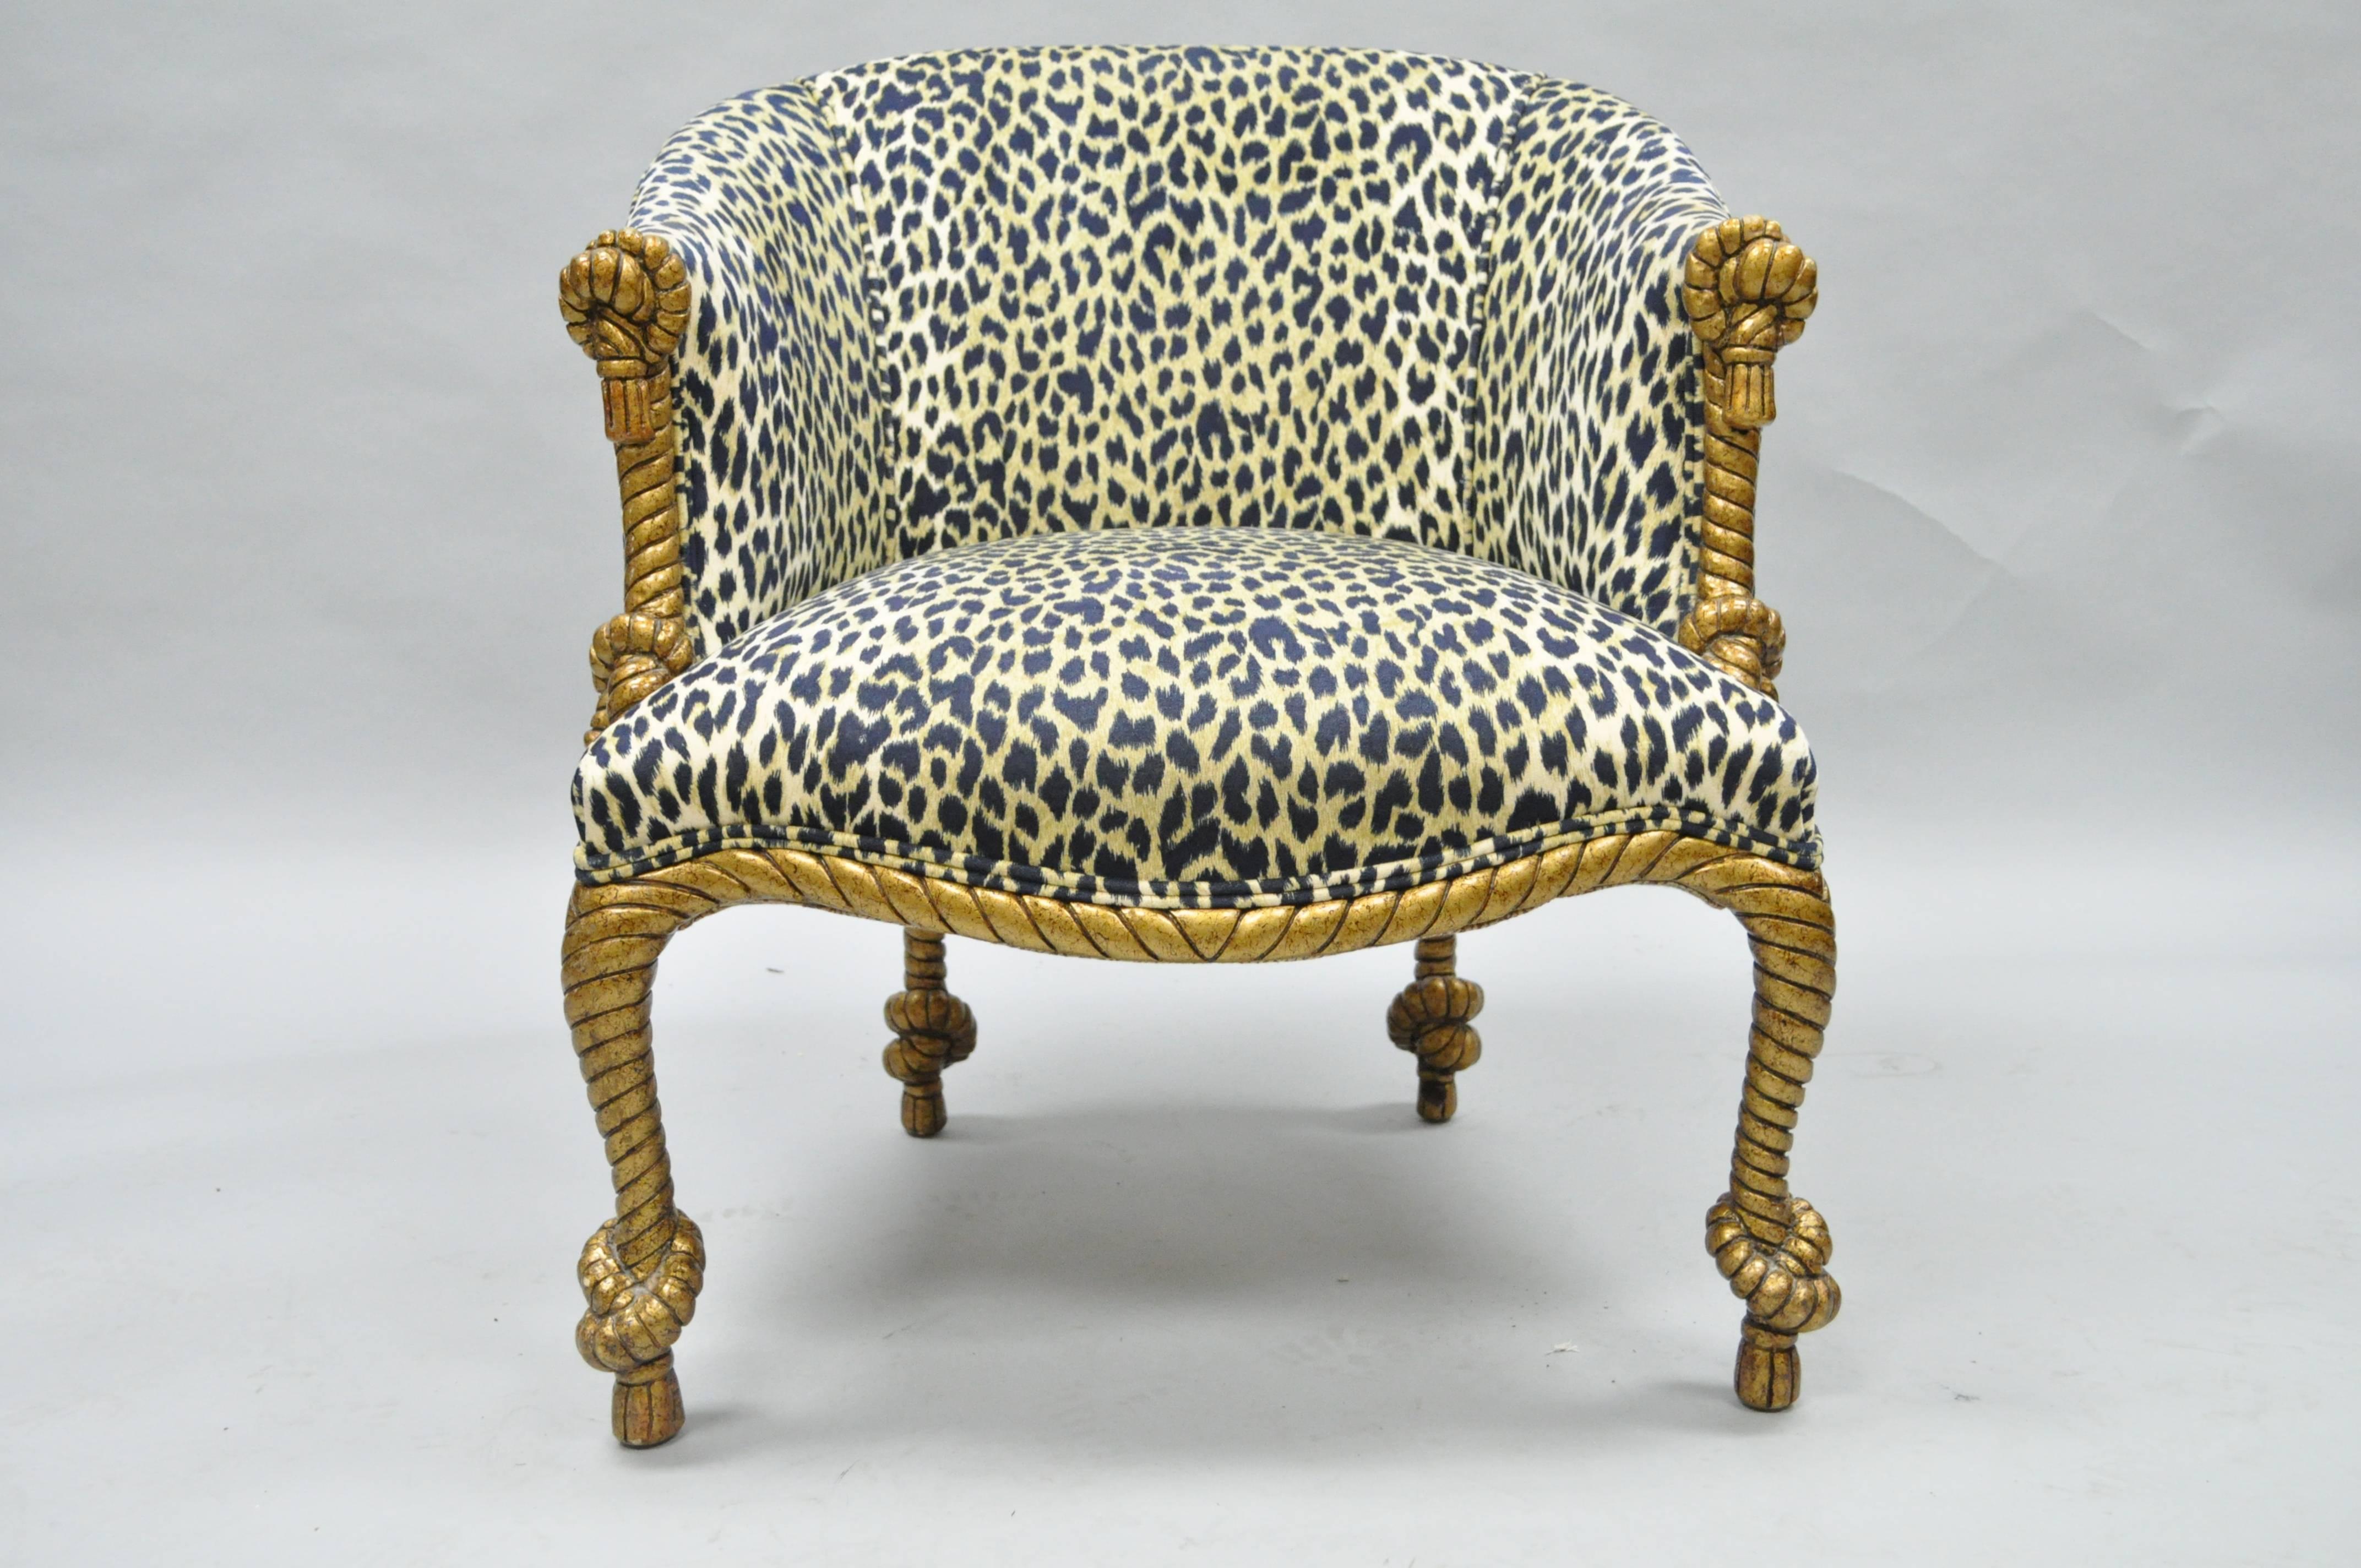 Vintage Italian Napoleon III style rope and tassel carved chair. Item features a solid carved wood barrel back frame, gold finish, leopard print upholstery (looks to be dark blue), great overall form and quality.